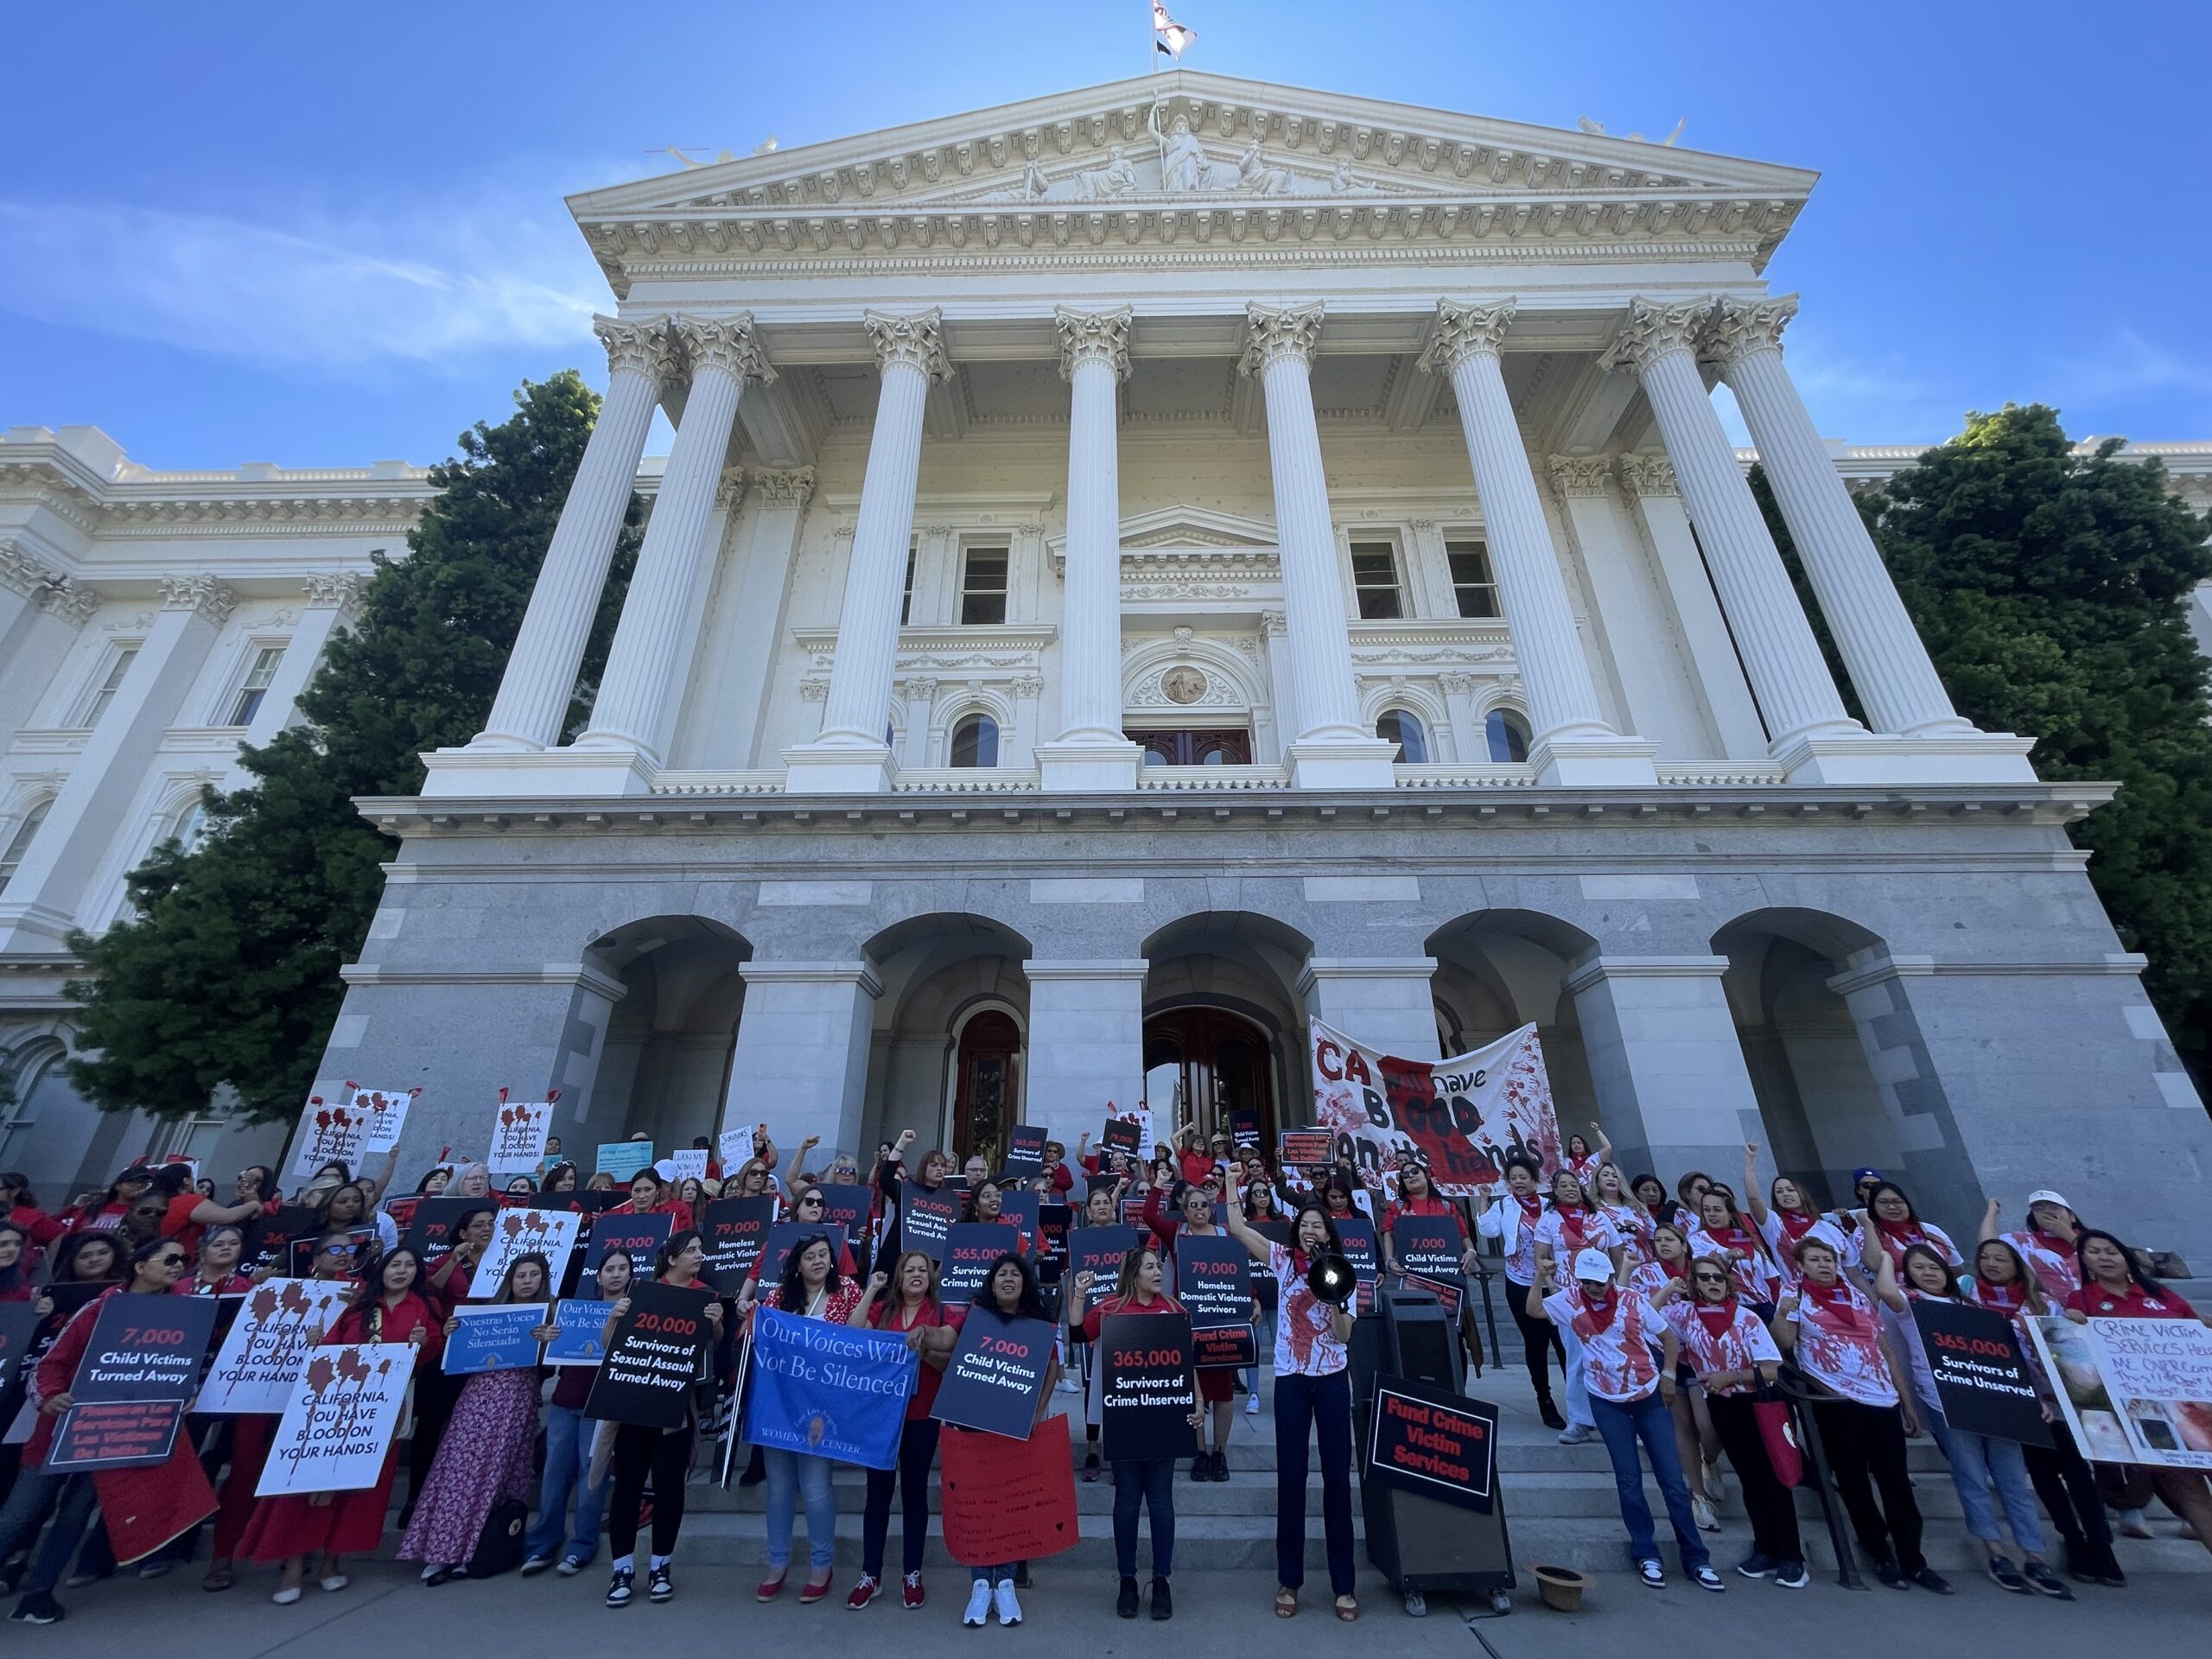 Photo of rally participants at the California Capitol.